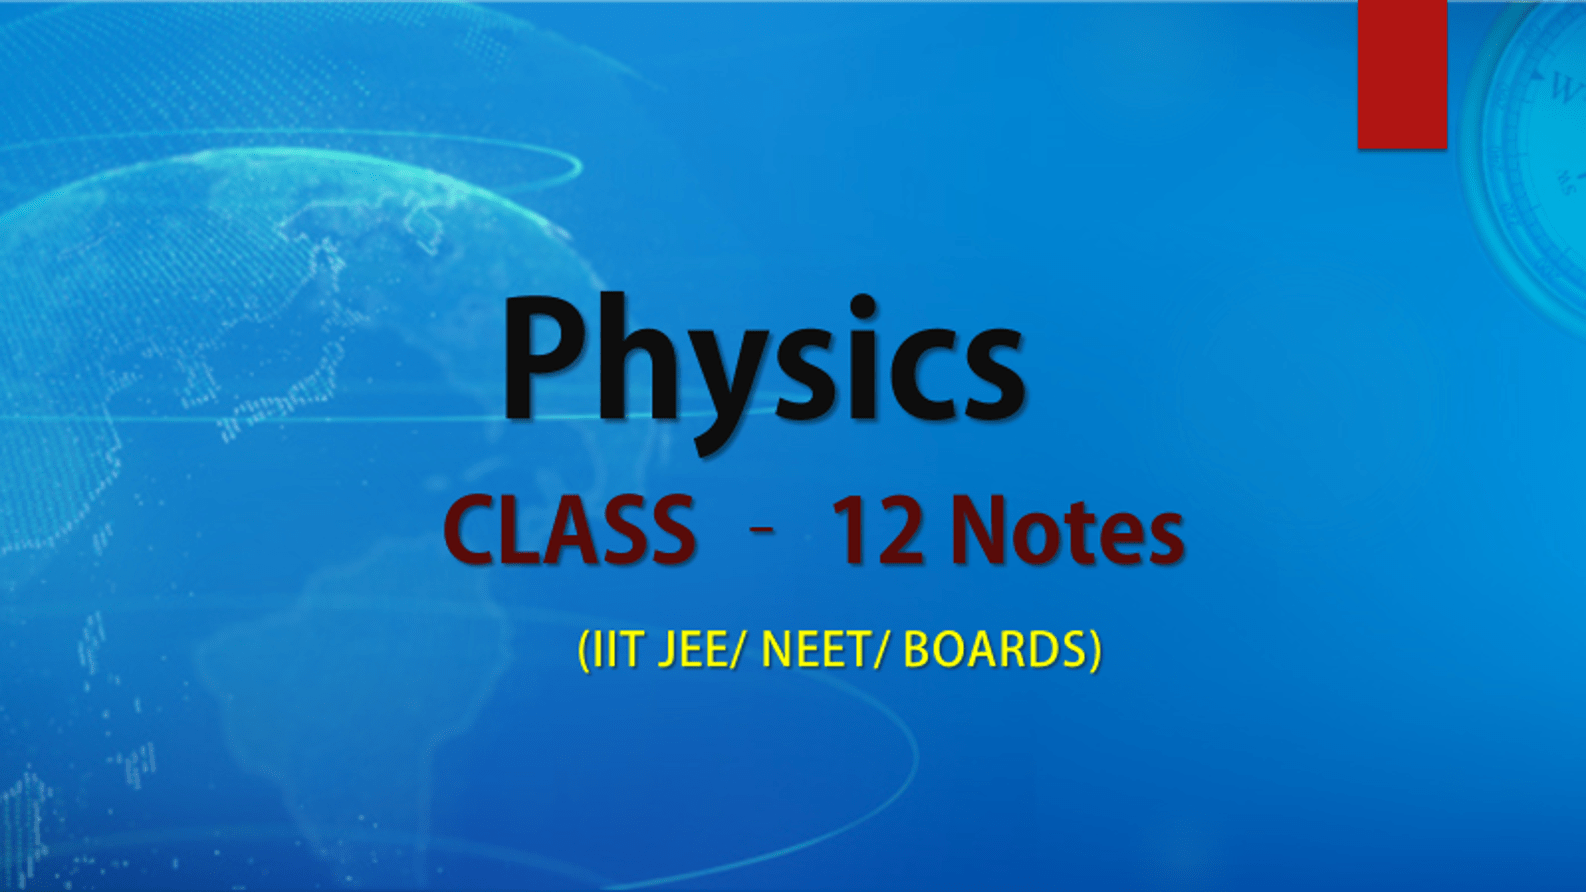 Complete Physics Notes for Class 12, IIT JEE and NEET Preparation